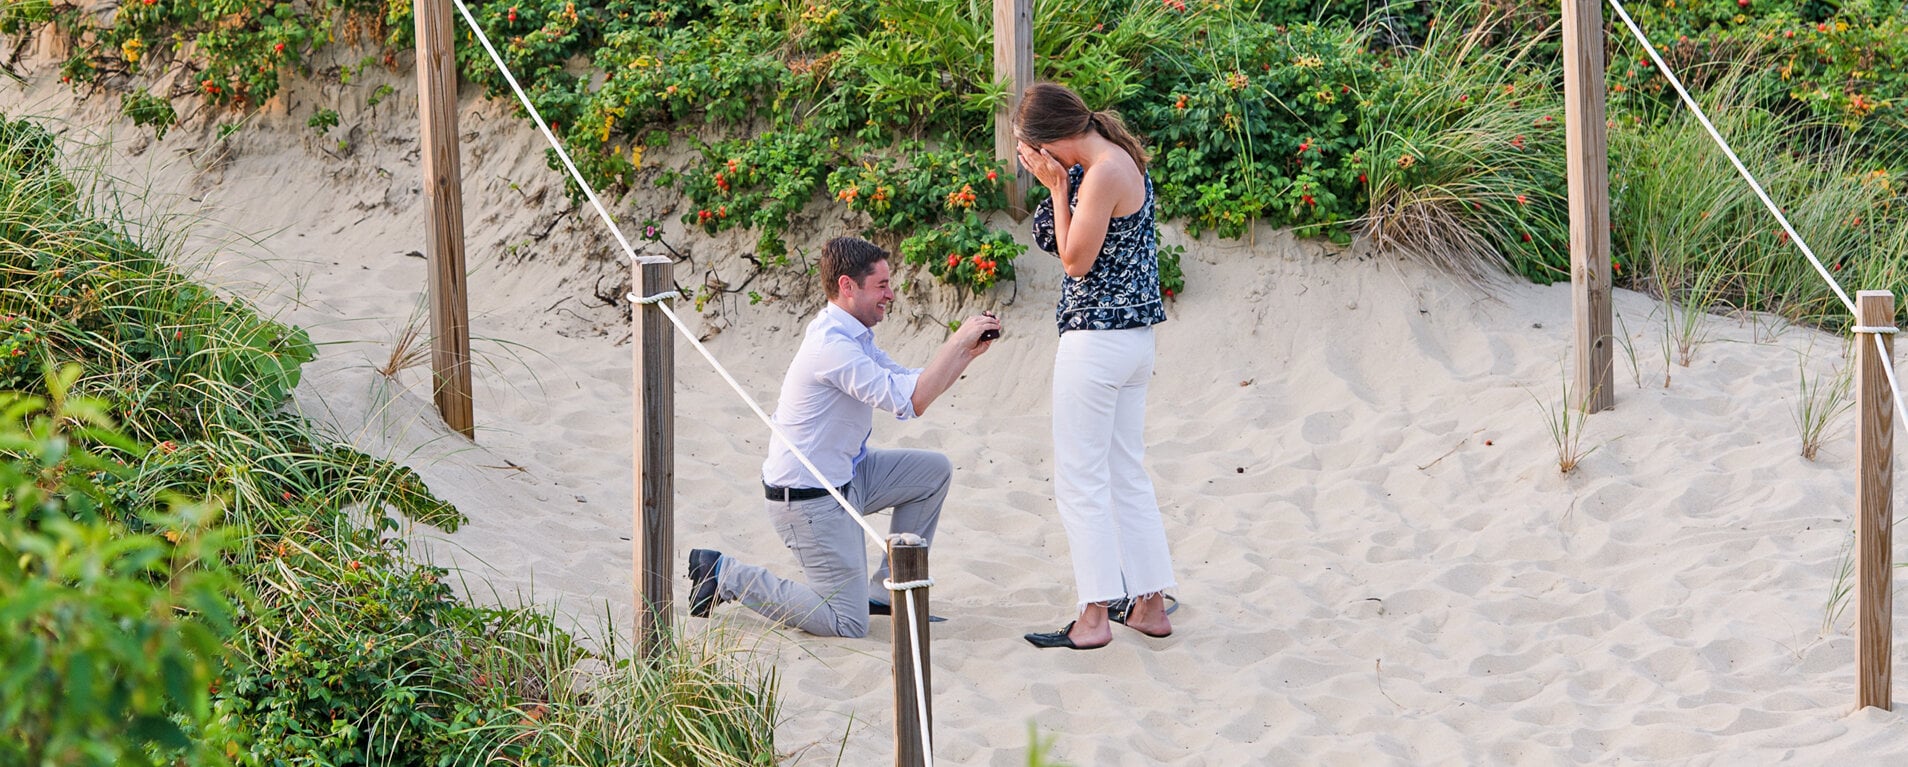 nantucket-wedding-proposal-at-steps-beach-captured-by-becky-zadroga-photography